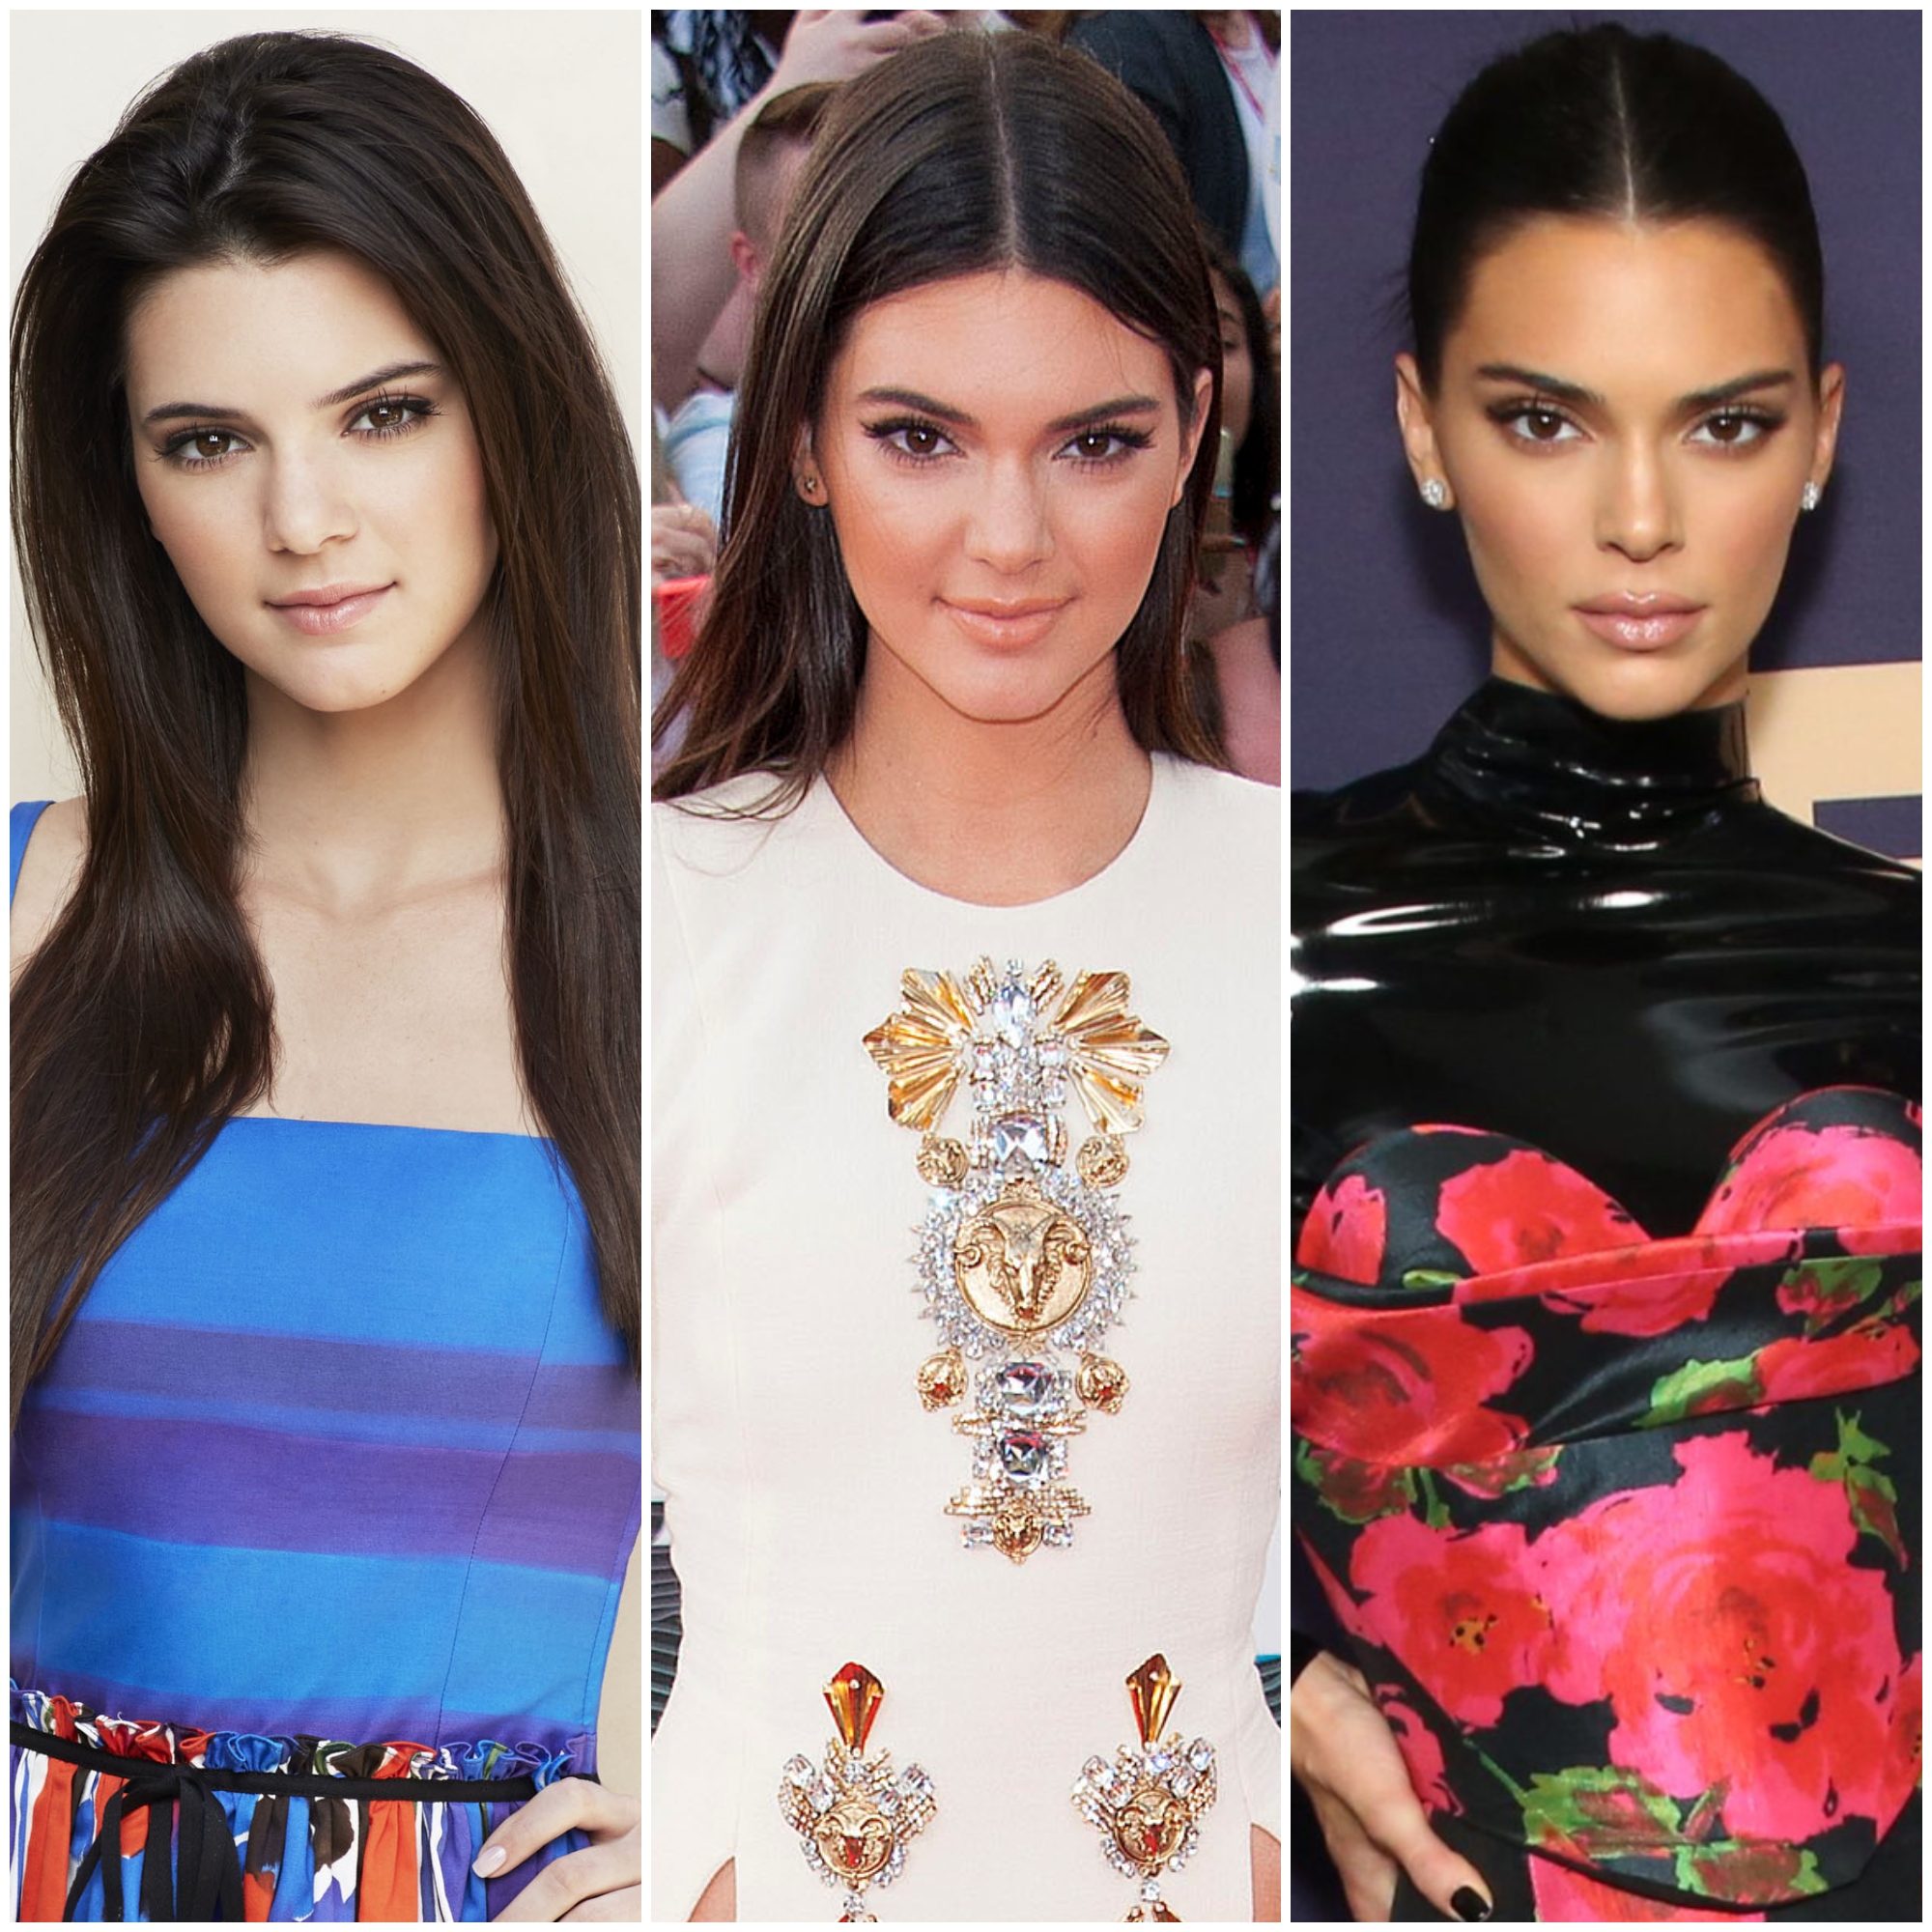 Kendall Jenner's Transformation: See Photos of Her Best Looks